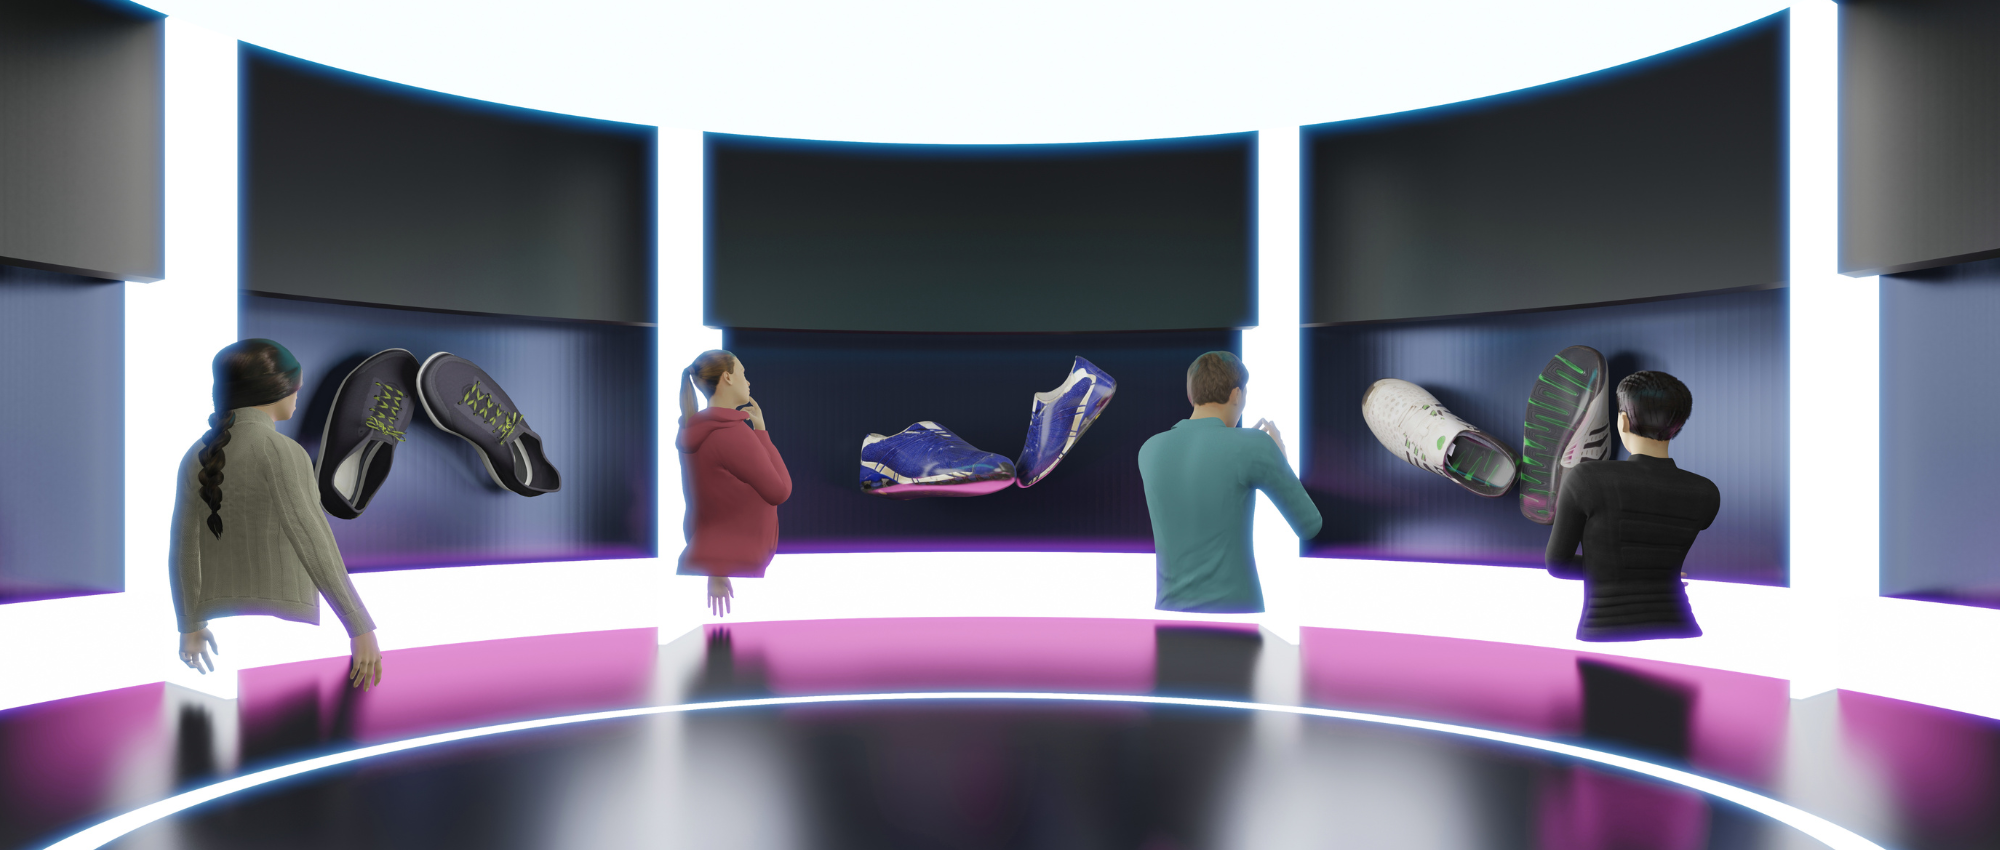 The Metaverse Vs. The Hype: How will it change the world of work?